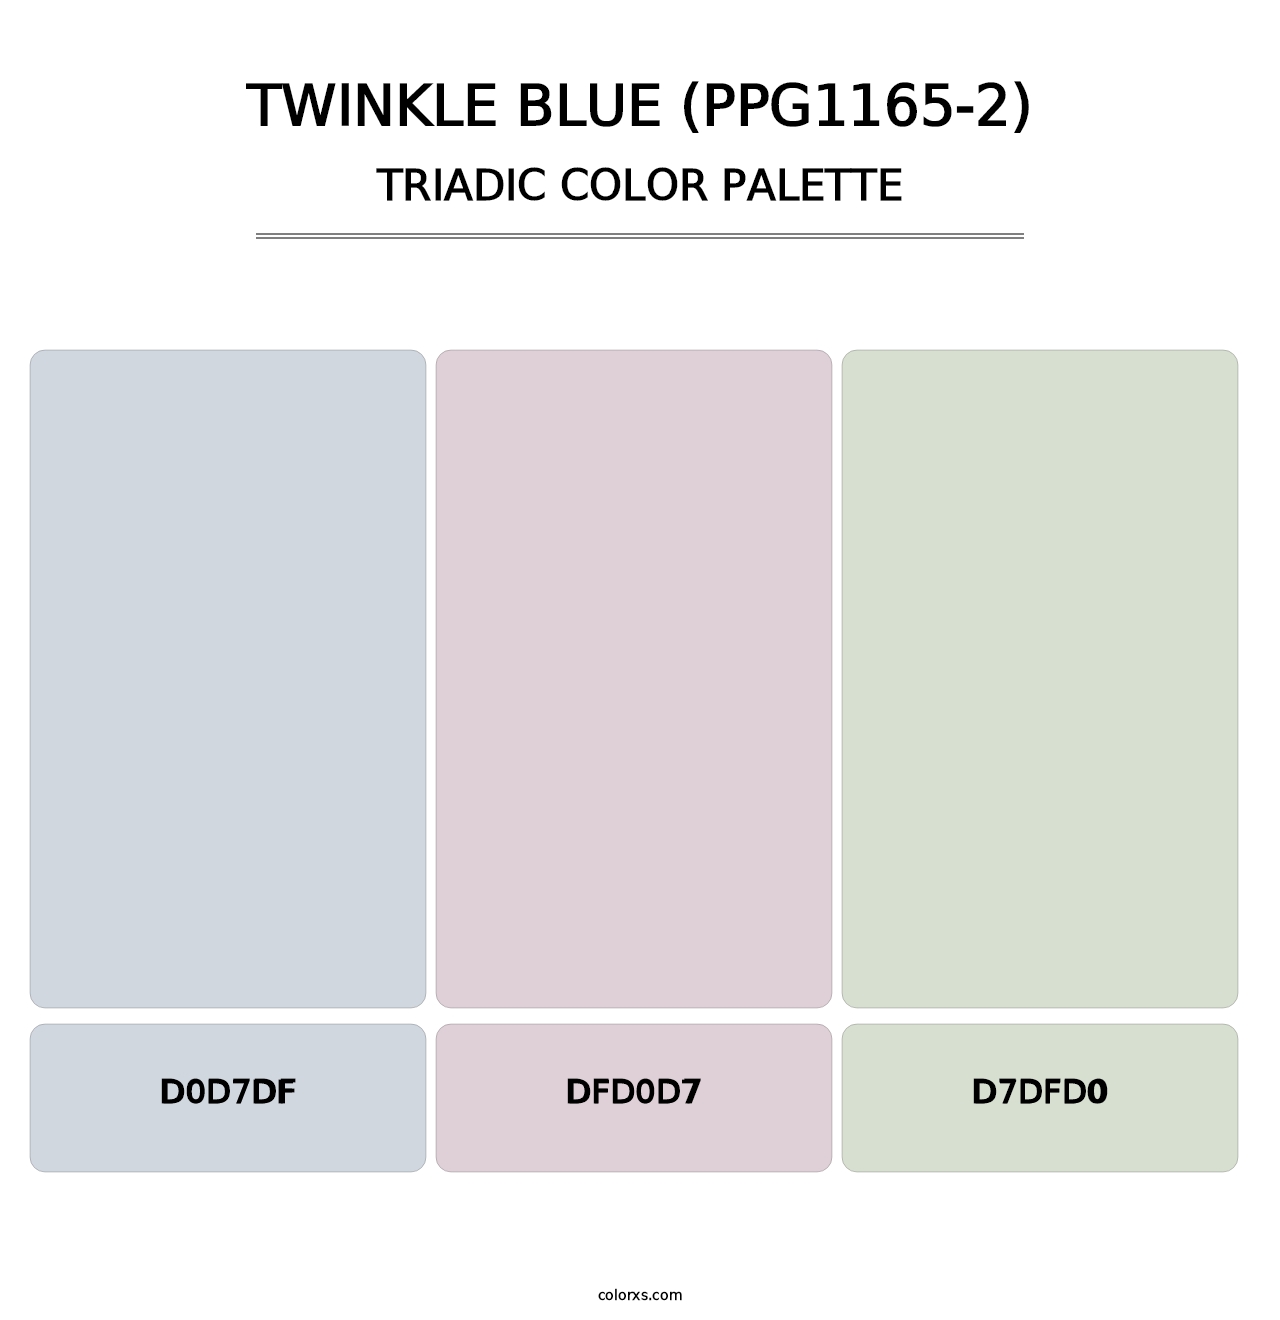 Twinkle Blue (PPG1165-2) - Triadic Color Palette